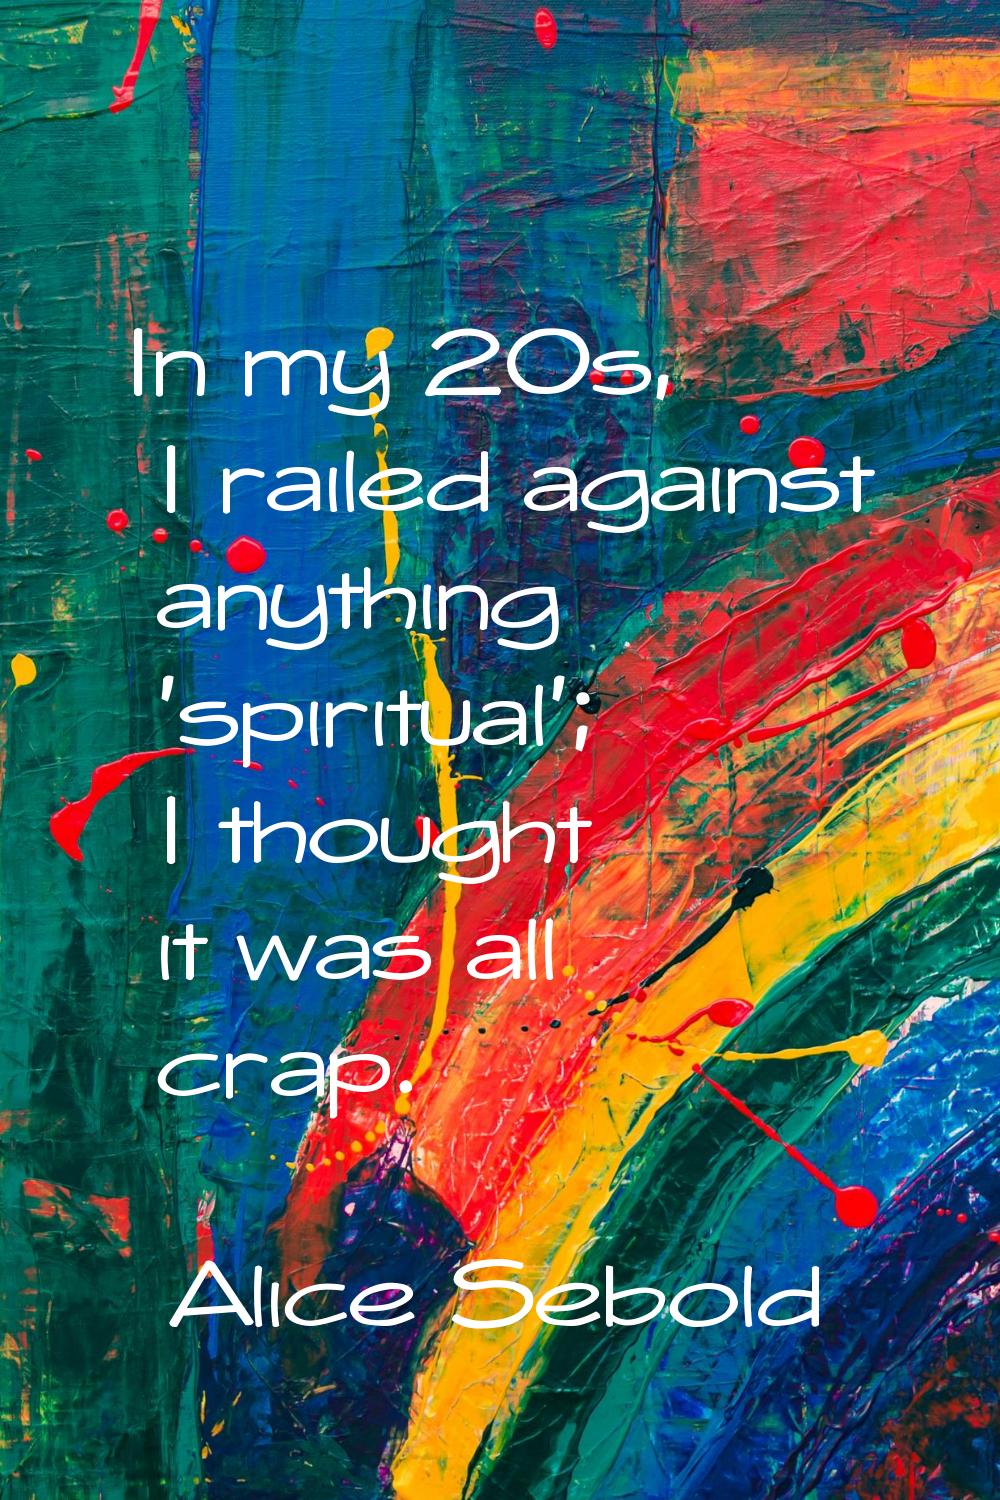 In my 20s, I railed against anything 'spiritual'; I thought it was all crap.